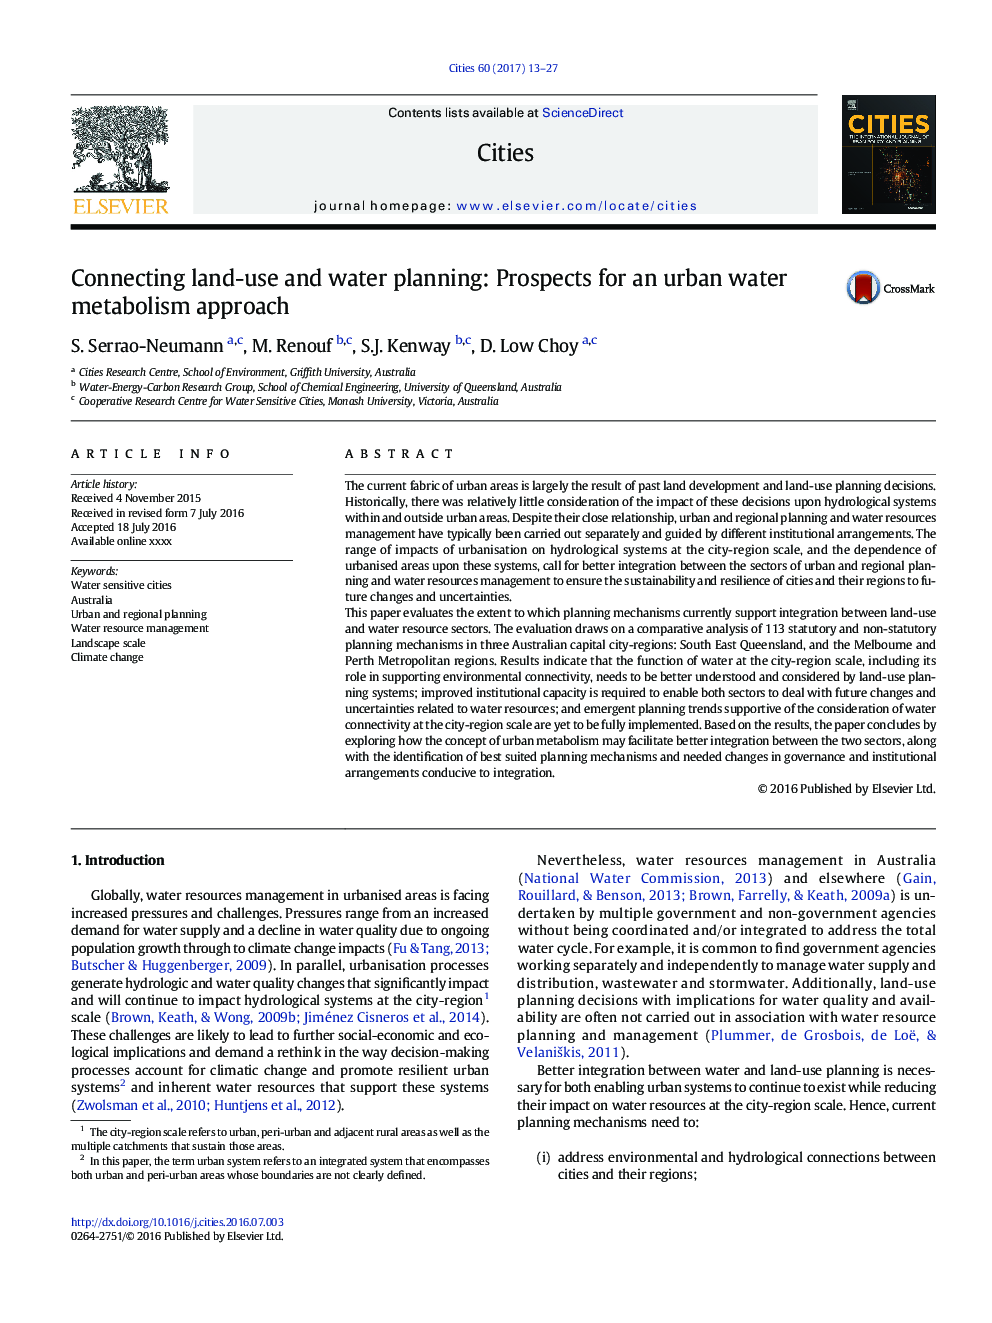 Connecting land-use and water planning: Prospects for an urban water metabolism approach